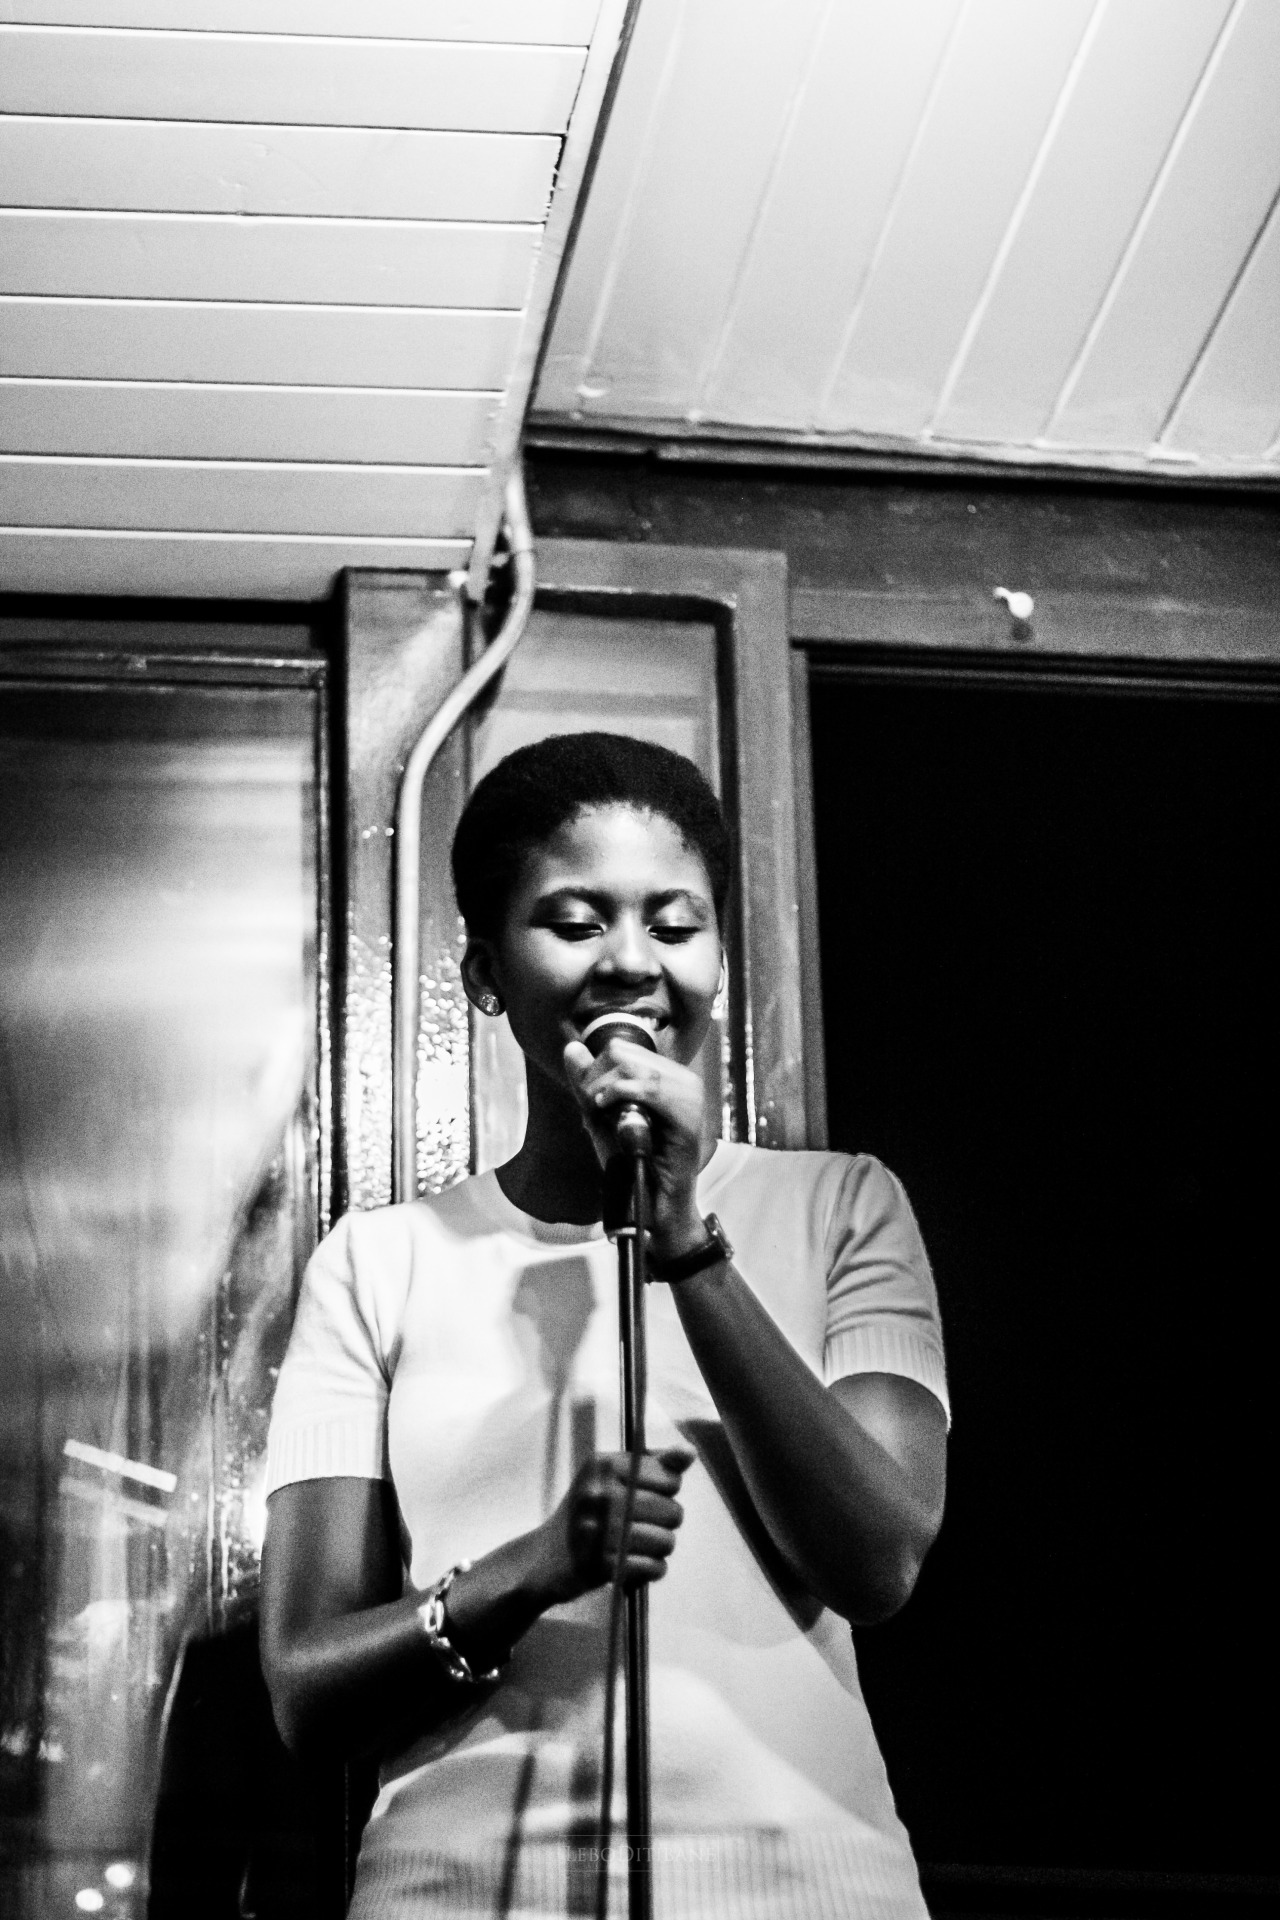 leboditibane:
“How she sees herself
Meet Gabisile “Gabi“ Motuba, one of the most amazing songstresses i have come by in these times of exploding artistry in South Africa. She’s involved in a number of projects musically such as #ProjectElo, The Trip,...